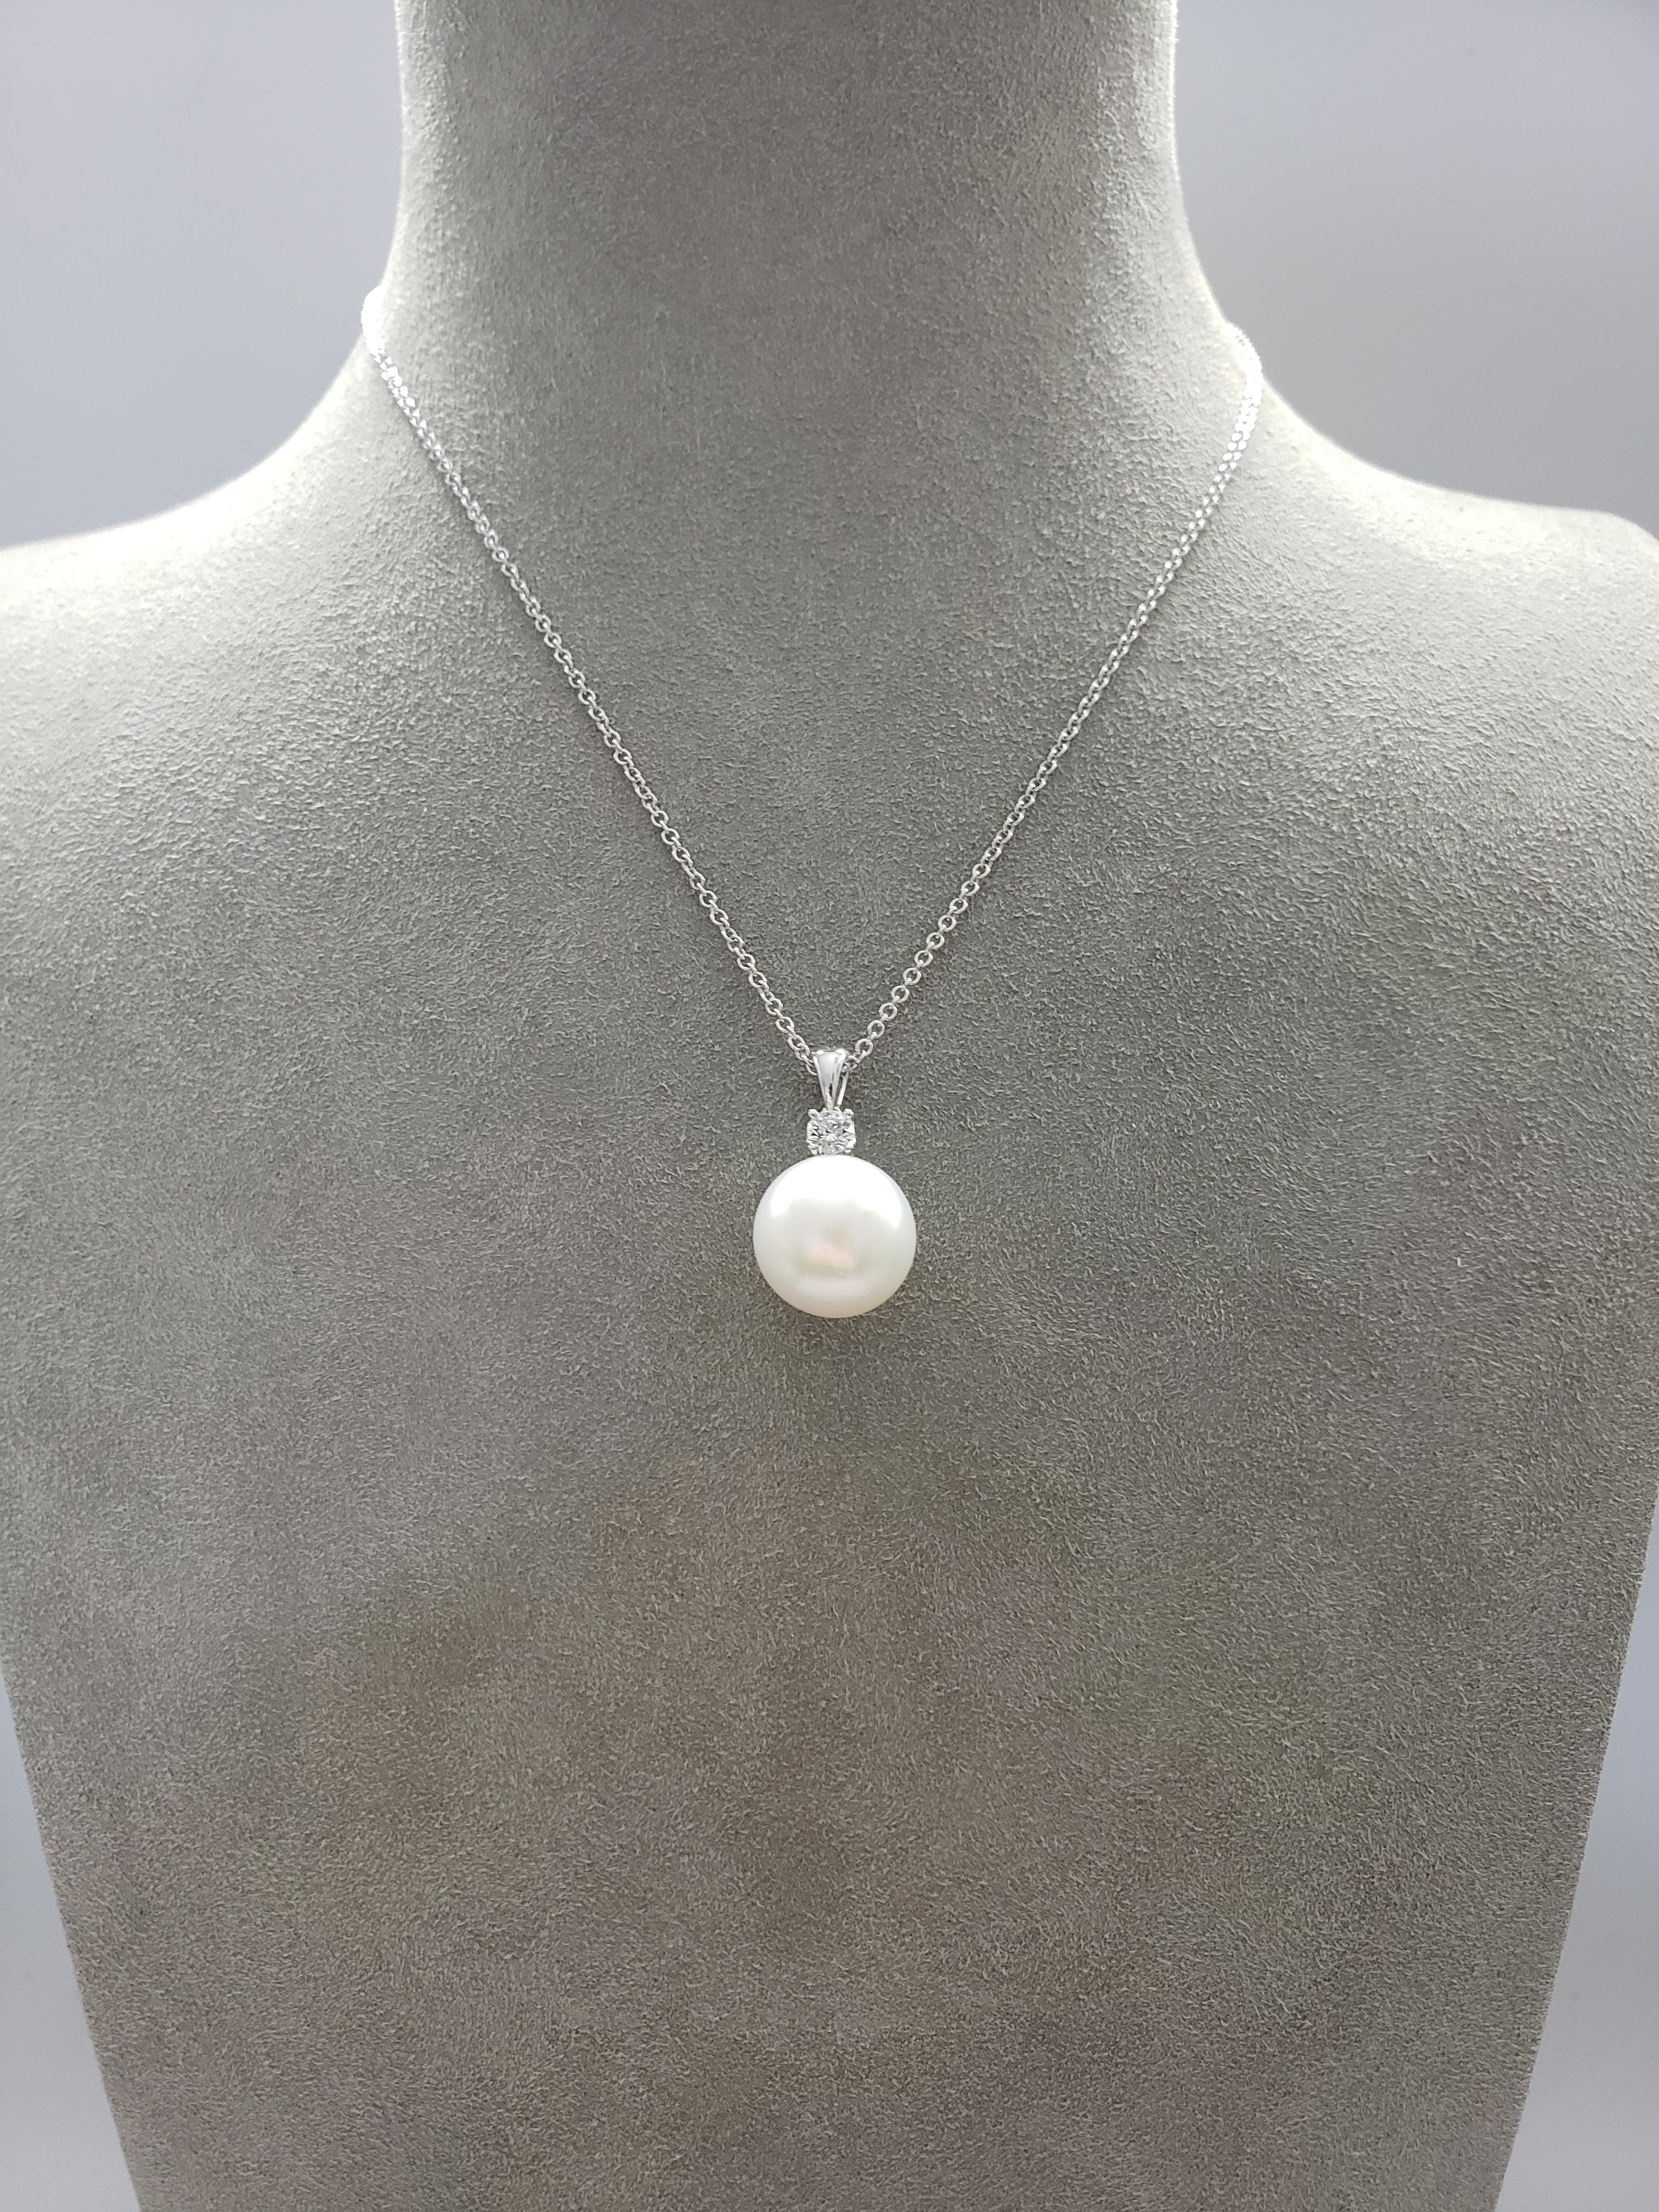 A pearl necklace showcasing a 14 millimeter South Sea pearl accented by a single brilliant round diamond weighing 0.26 carats total. Set in 18 karat white gold. Attached to a 18 inch white gold chain. 
